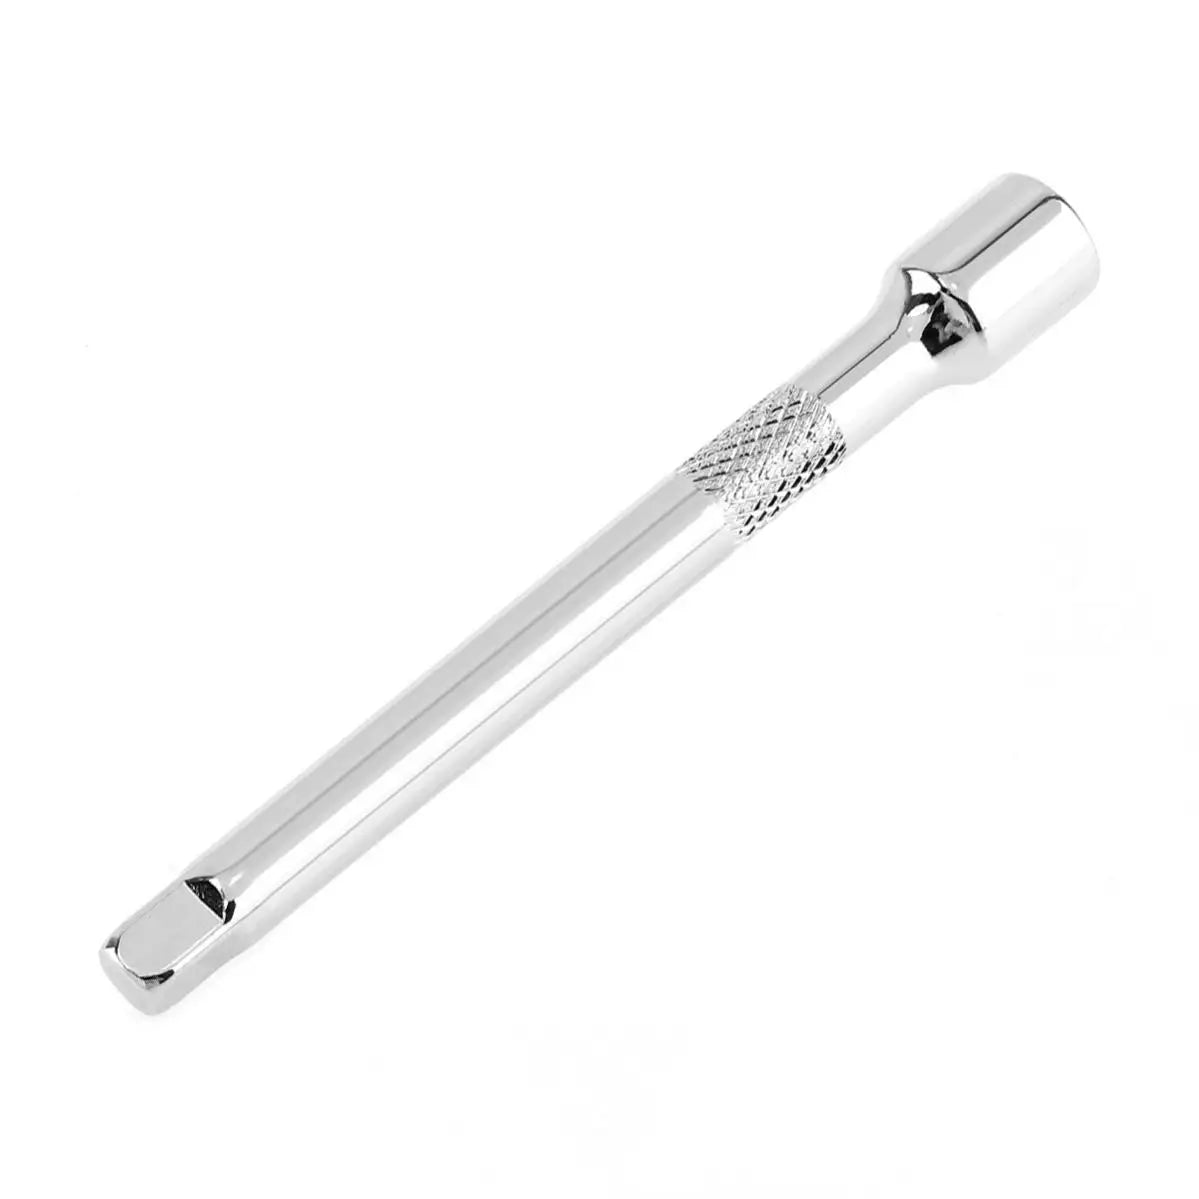 1/4 Chromed Steel 102MM Extension Bar Drive Ratchet Wrench Socket Adapter Power Drill Adapter